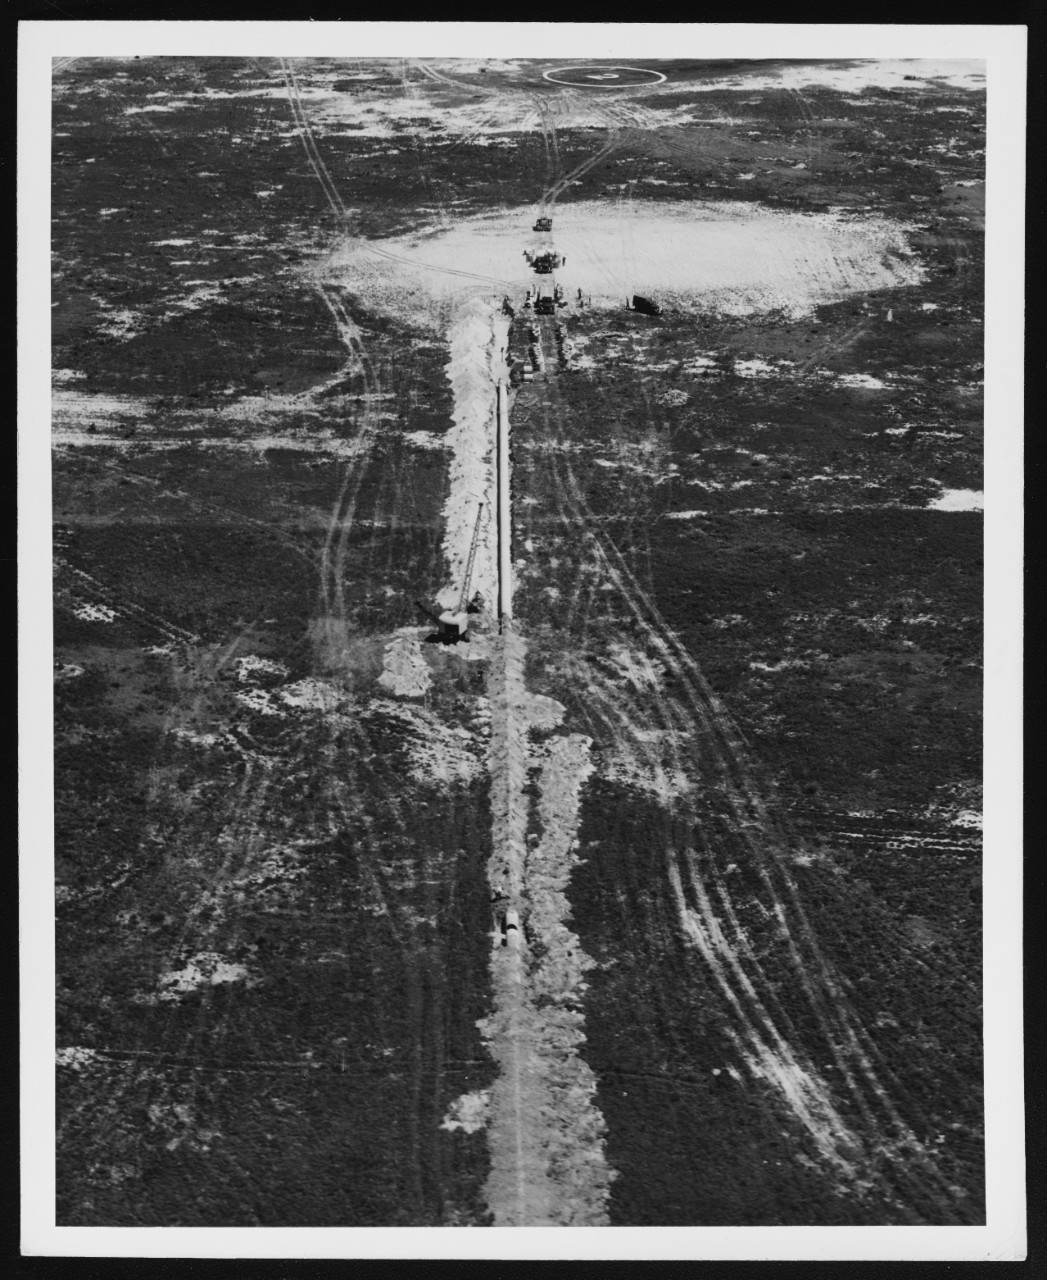 Storm sewer for flying field, U.S. Naval Air Station, Lakehurst, New Jersey